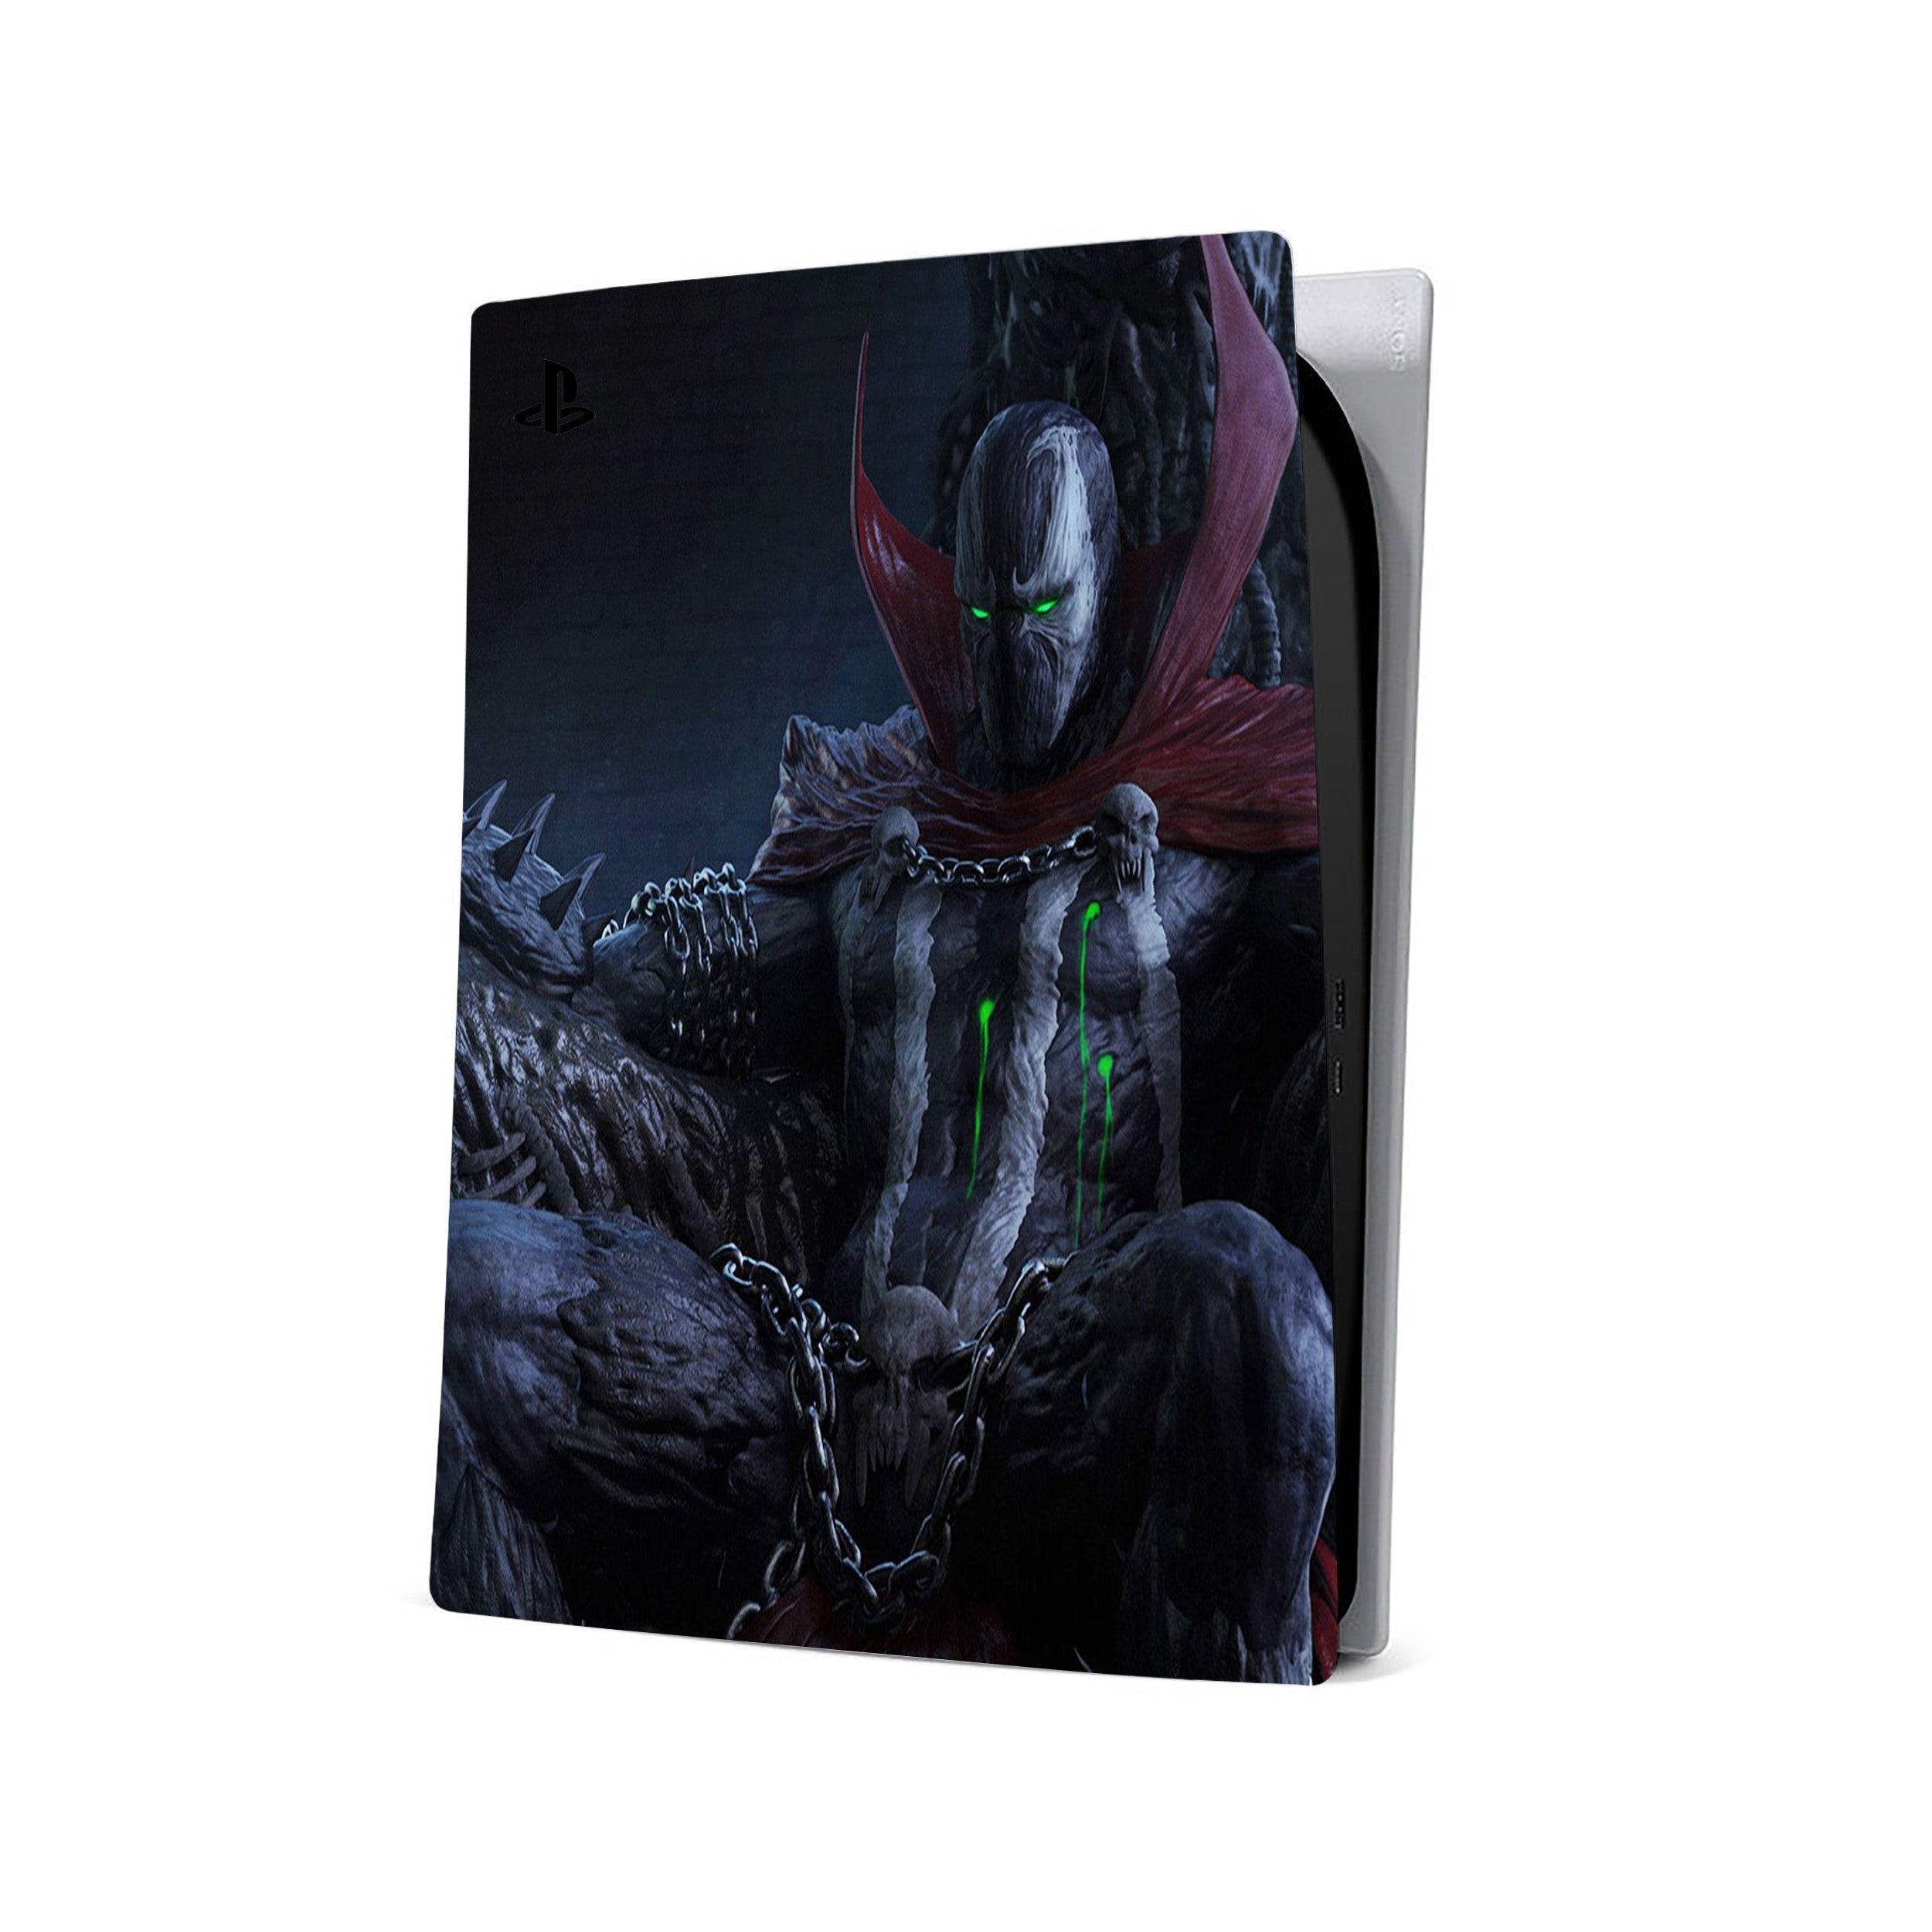 A video game skin featuring a Image Comics Spawn design for the PS5.